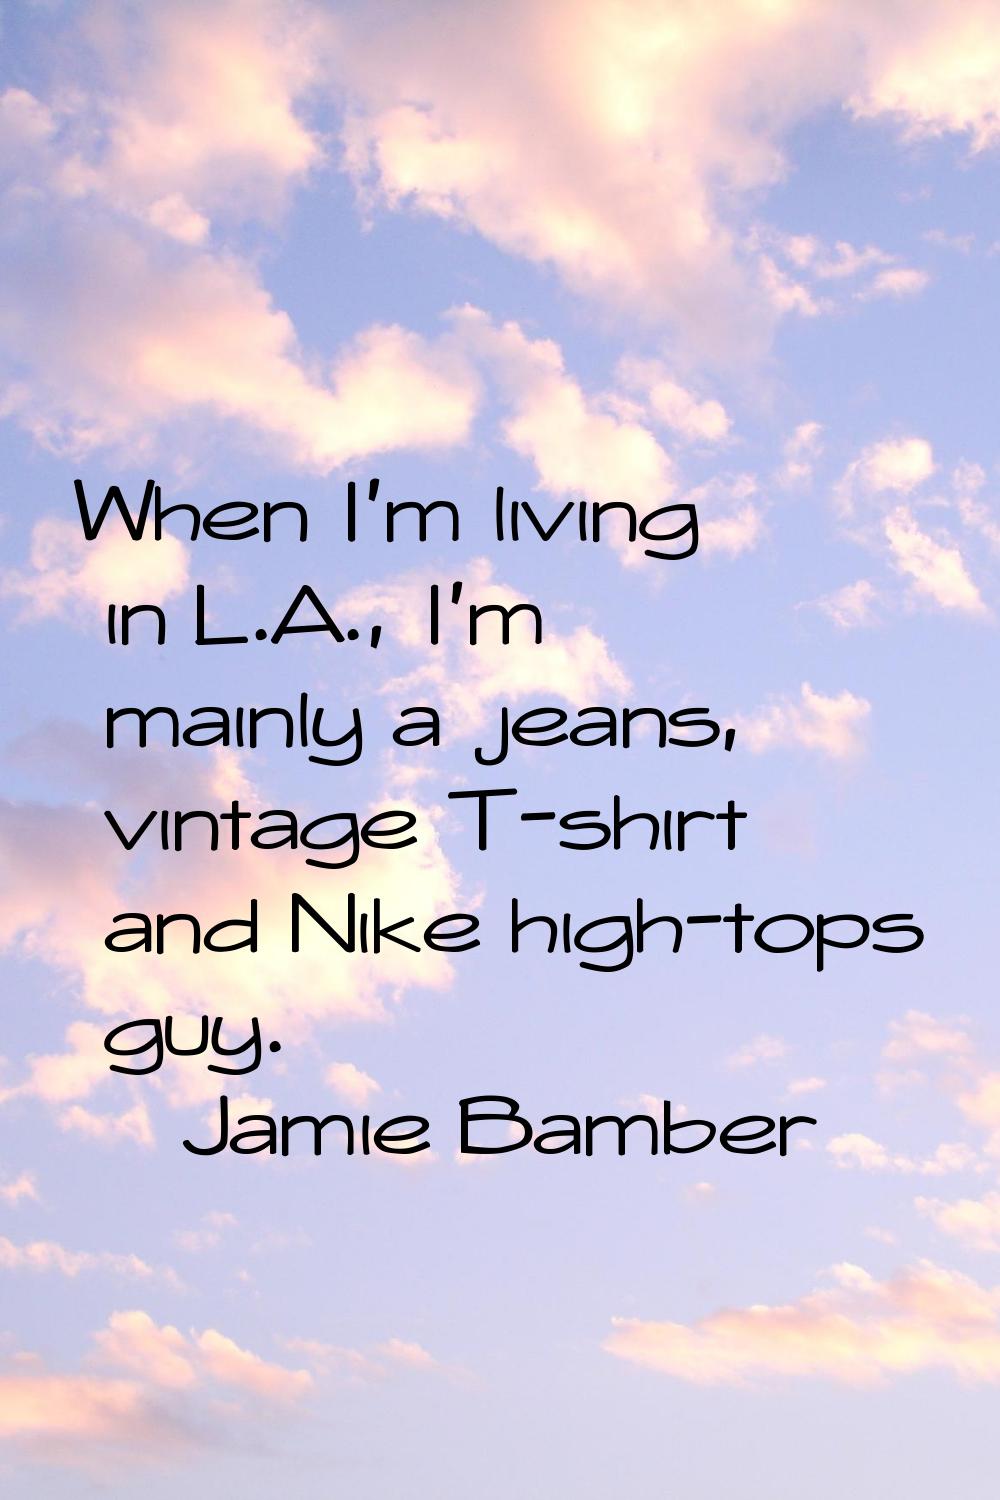 When I'm living in L.A., I'm mainly a jeans, vintage T-shirt and Nike high-tops guy.